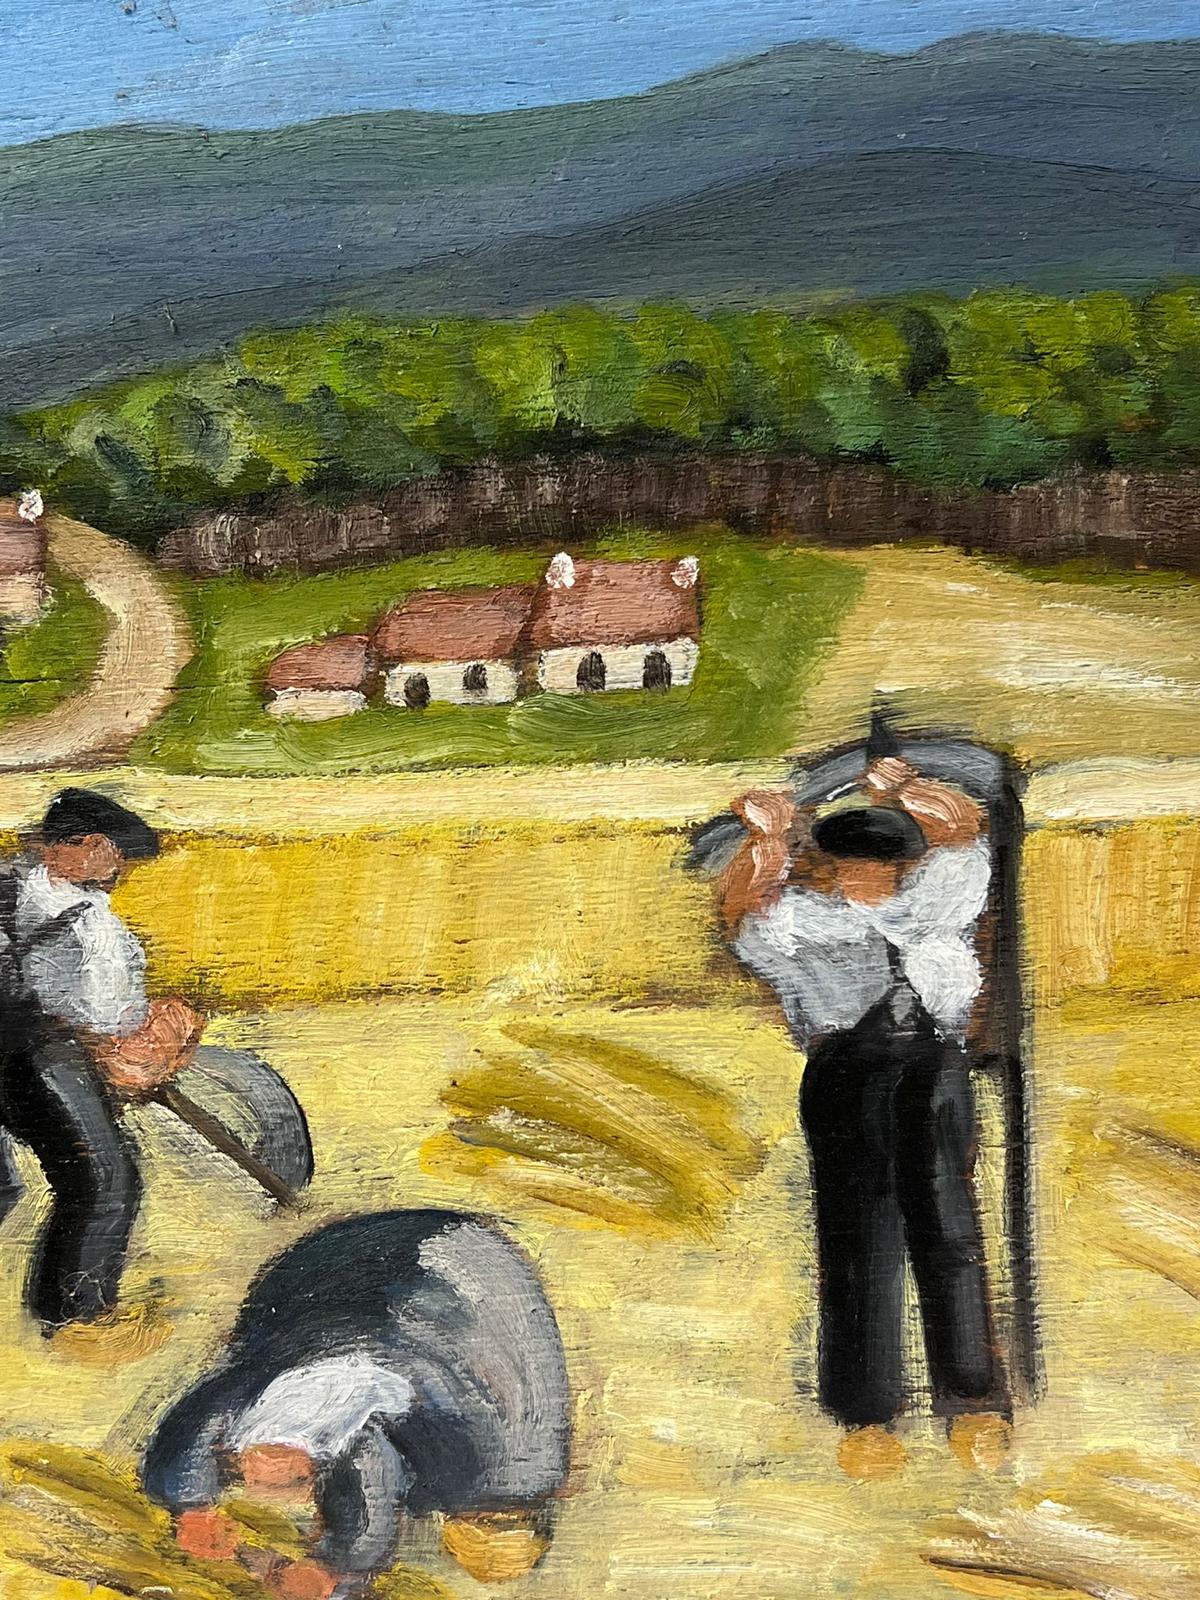 The Harvest Workers
by Louise Alix (French, 1888-1980) *see notes below
provenance stamp to the back 
oil painting on board, unframed
measures: 11 high by 11.75 inches wide
condition: overall very good and sound, a few scuffs and marks to the